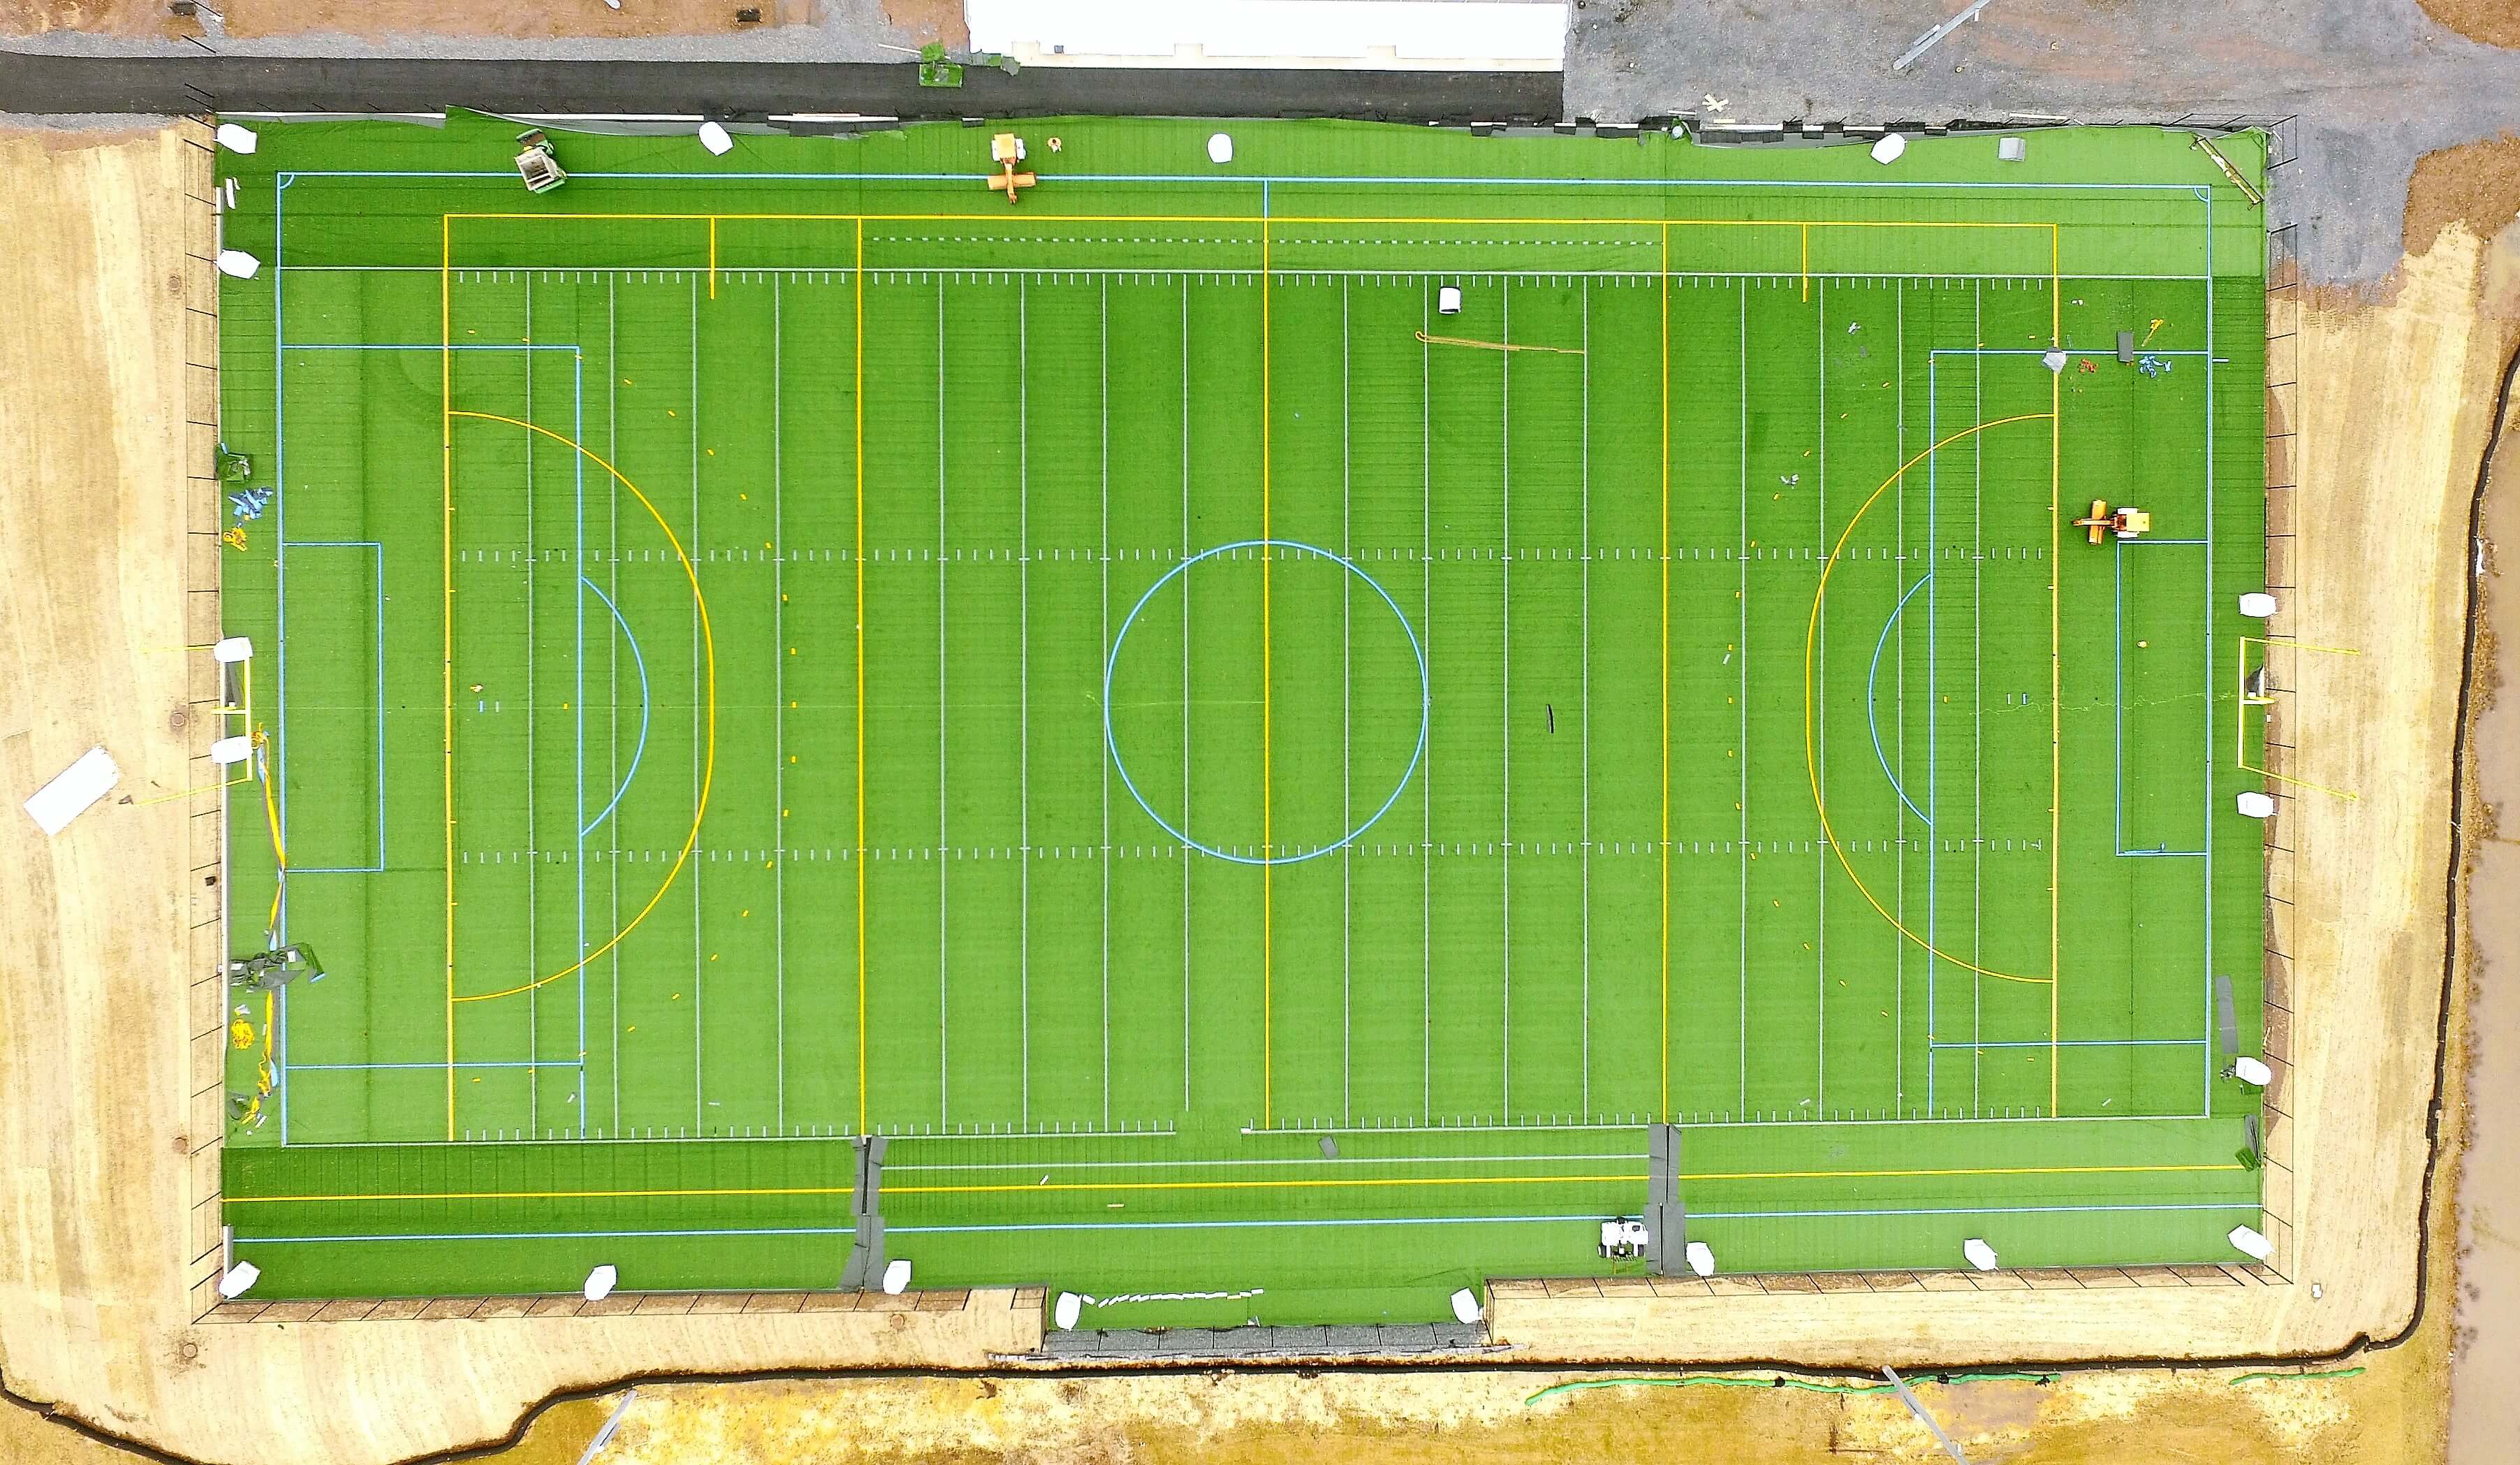 Artificial turf yields real benefits